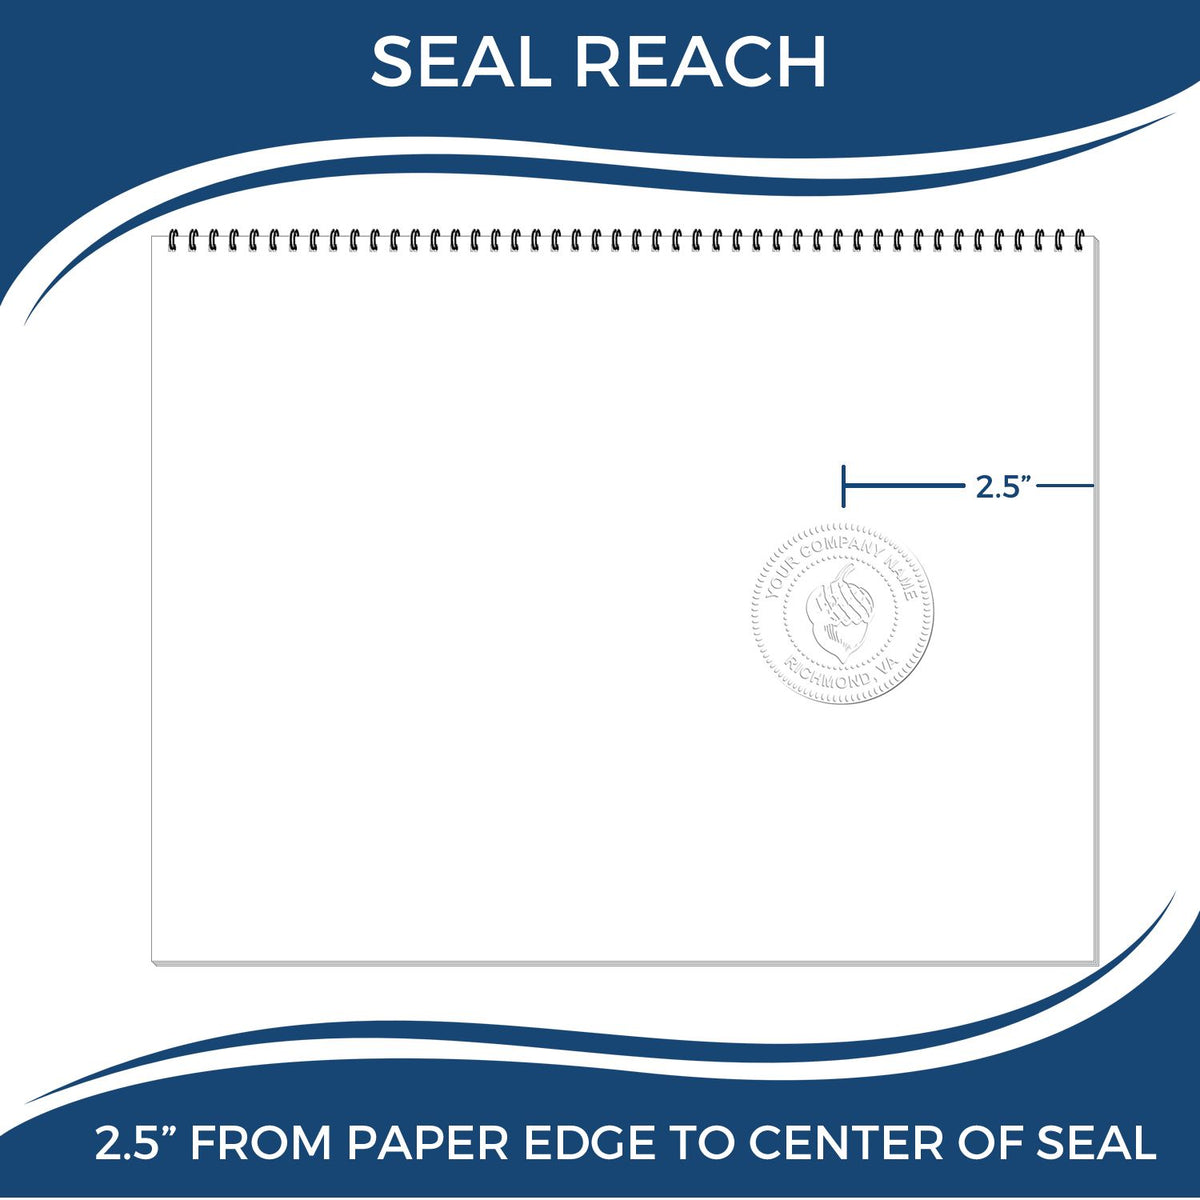 An infographic showing the seal reach which is represented by a ruler and a miniature seal image of the Heavy Duty Cast Iron Hawaii Architect Embosser